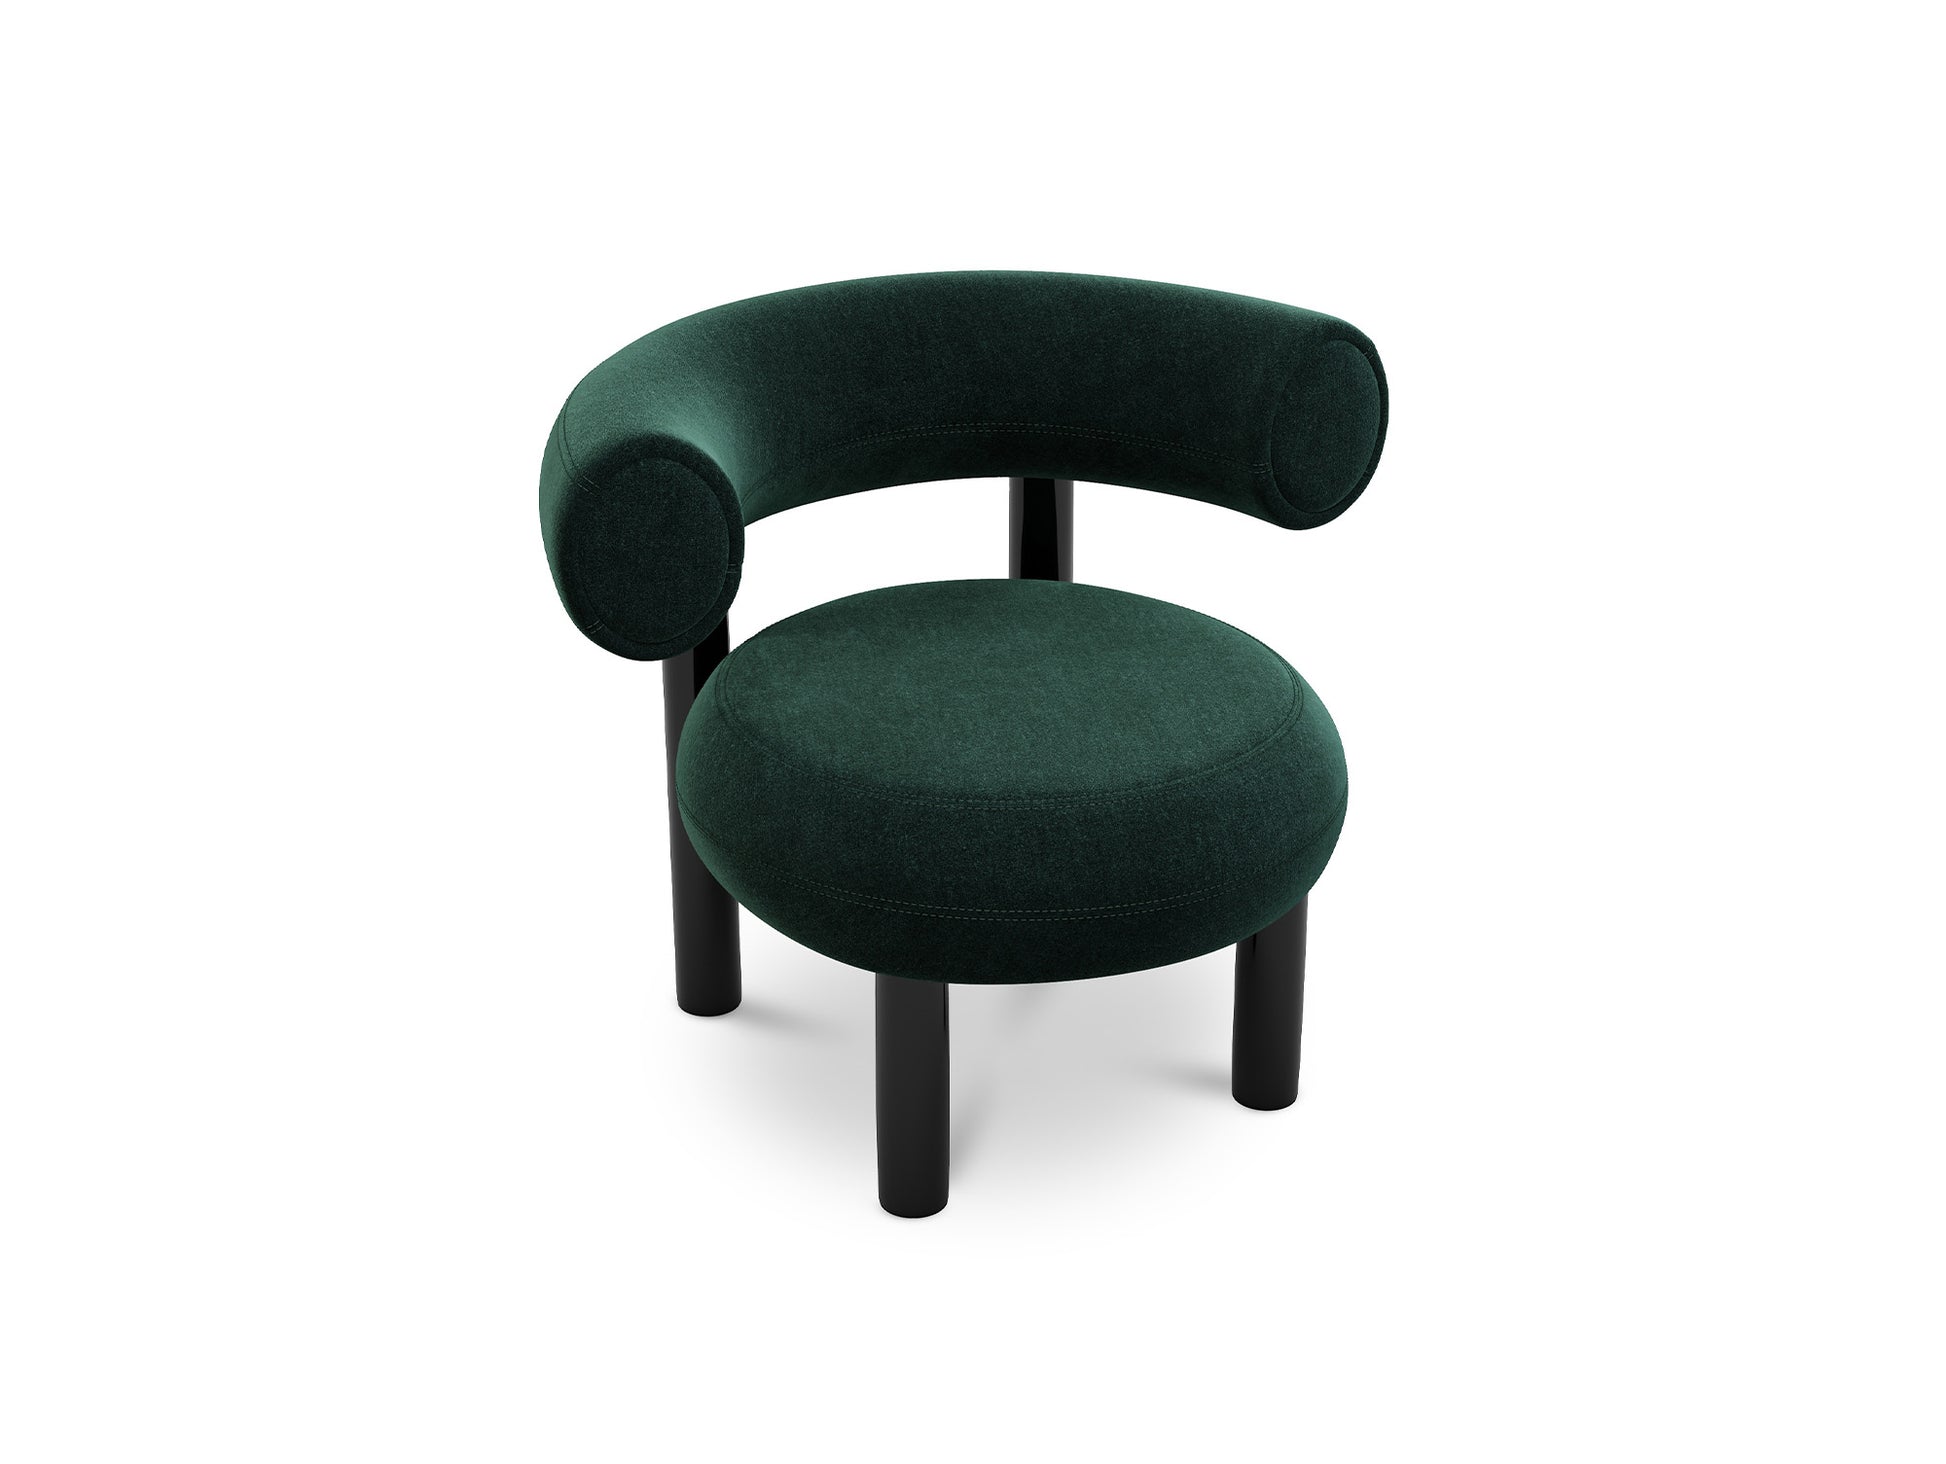 Fat Lounge Chair by Tom Dixon - Gentle 2 973